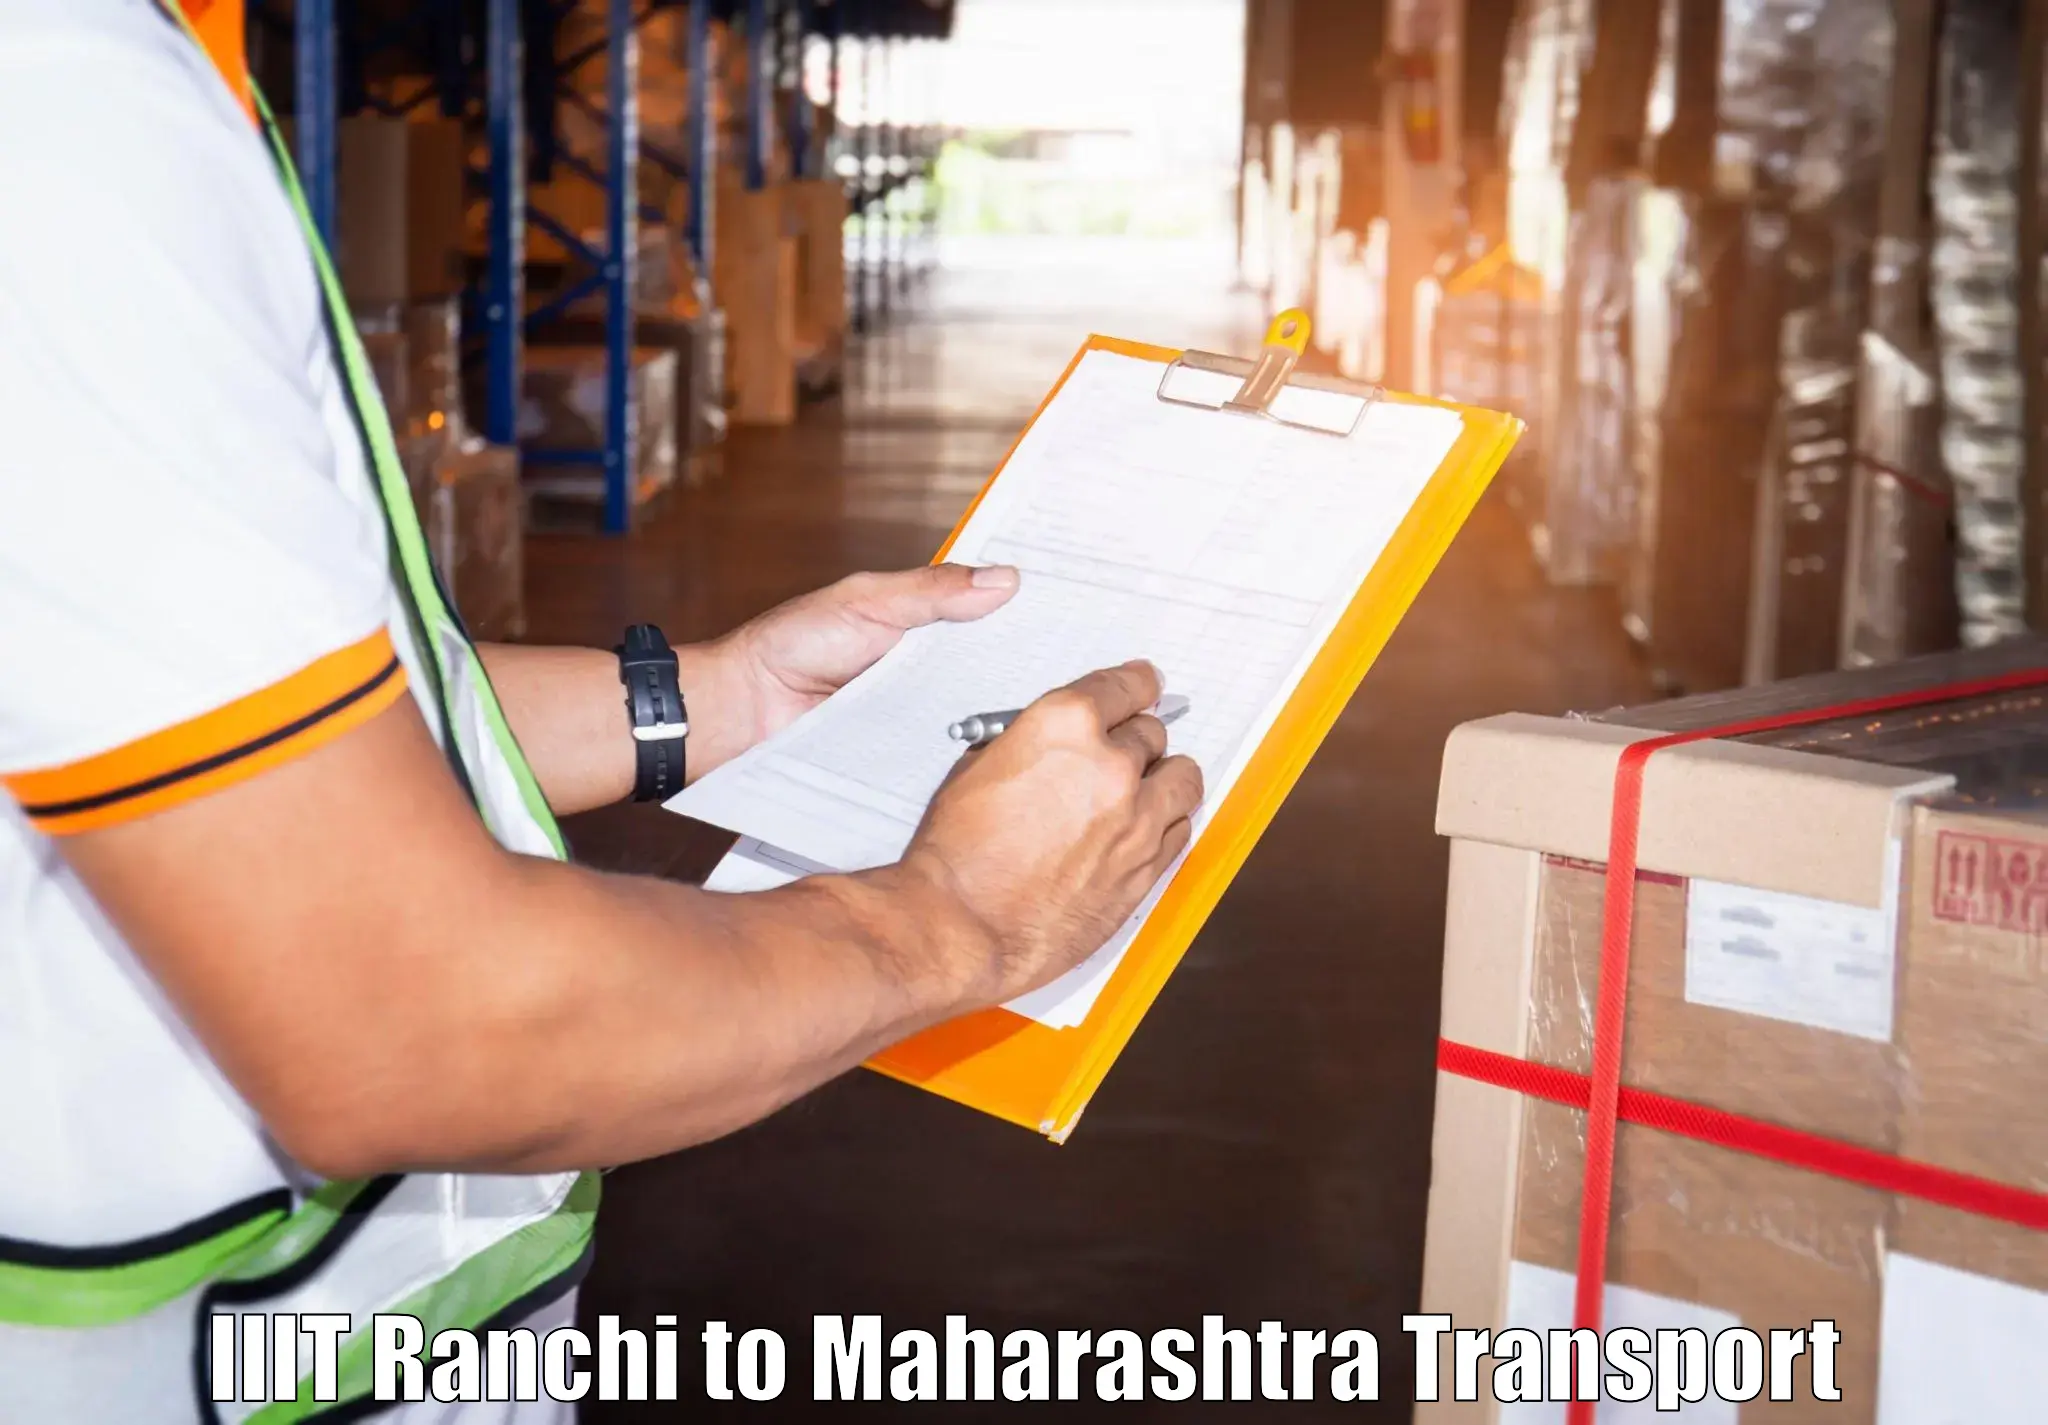 Transportation services in IIIT Ranchi to Bhiwandi